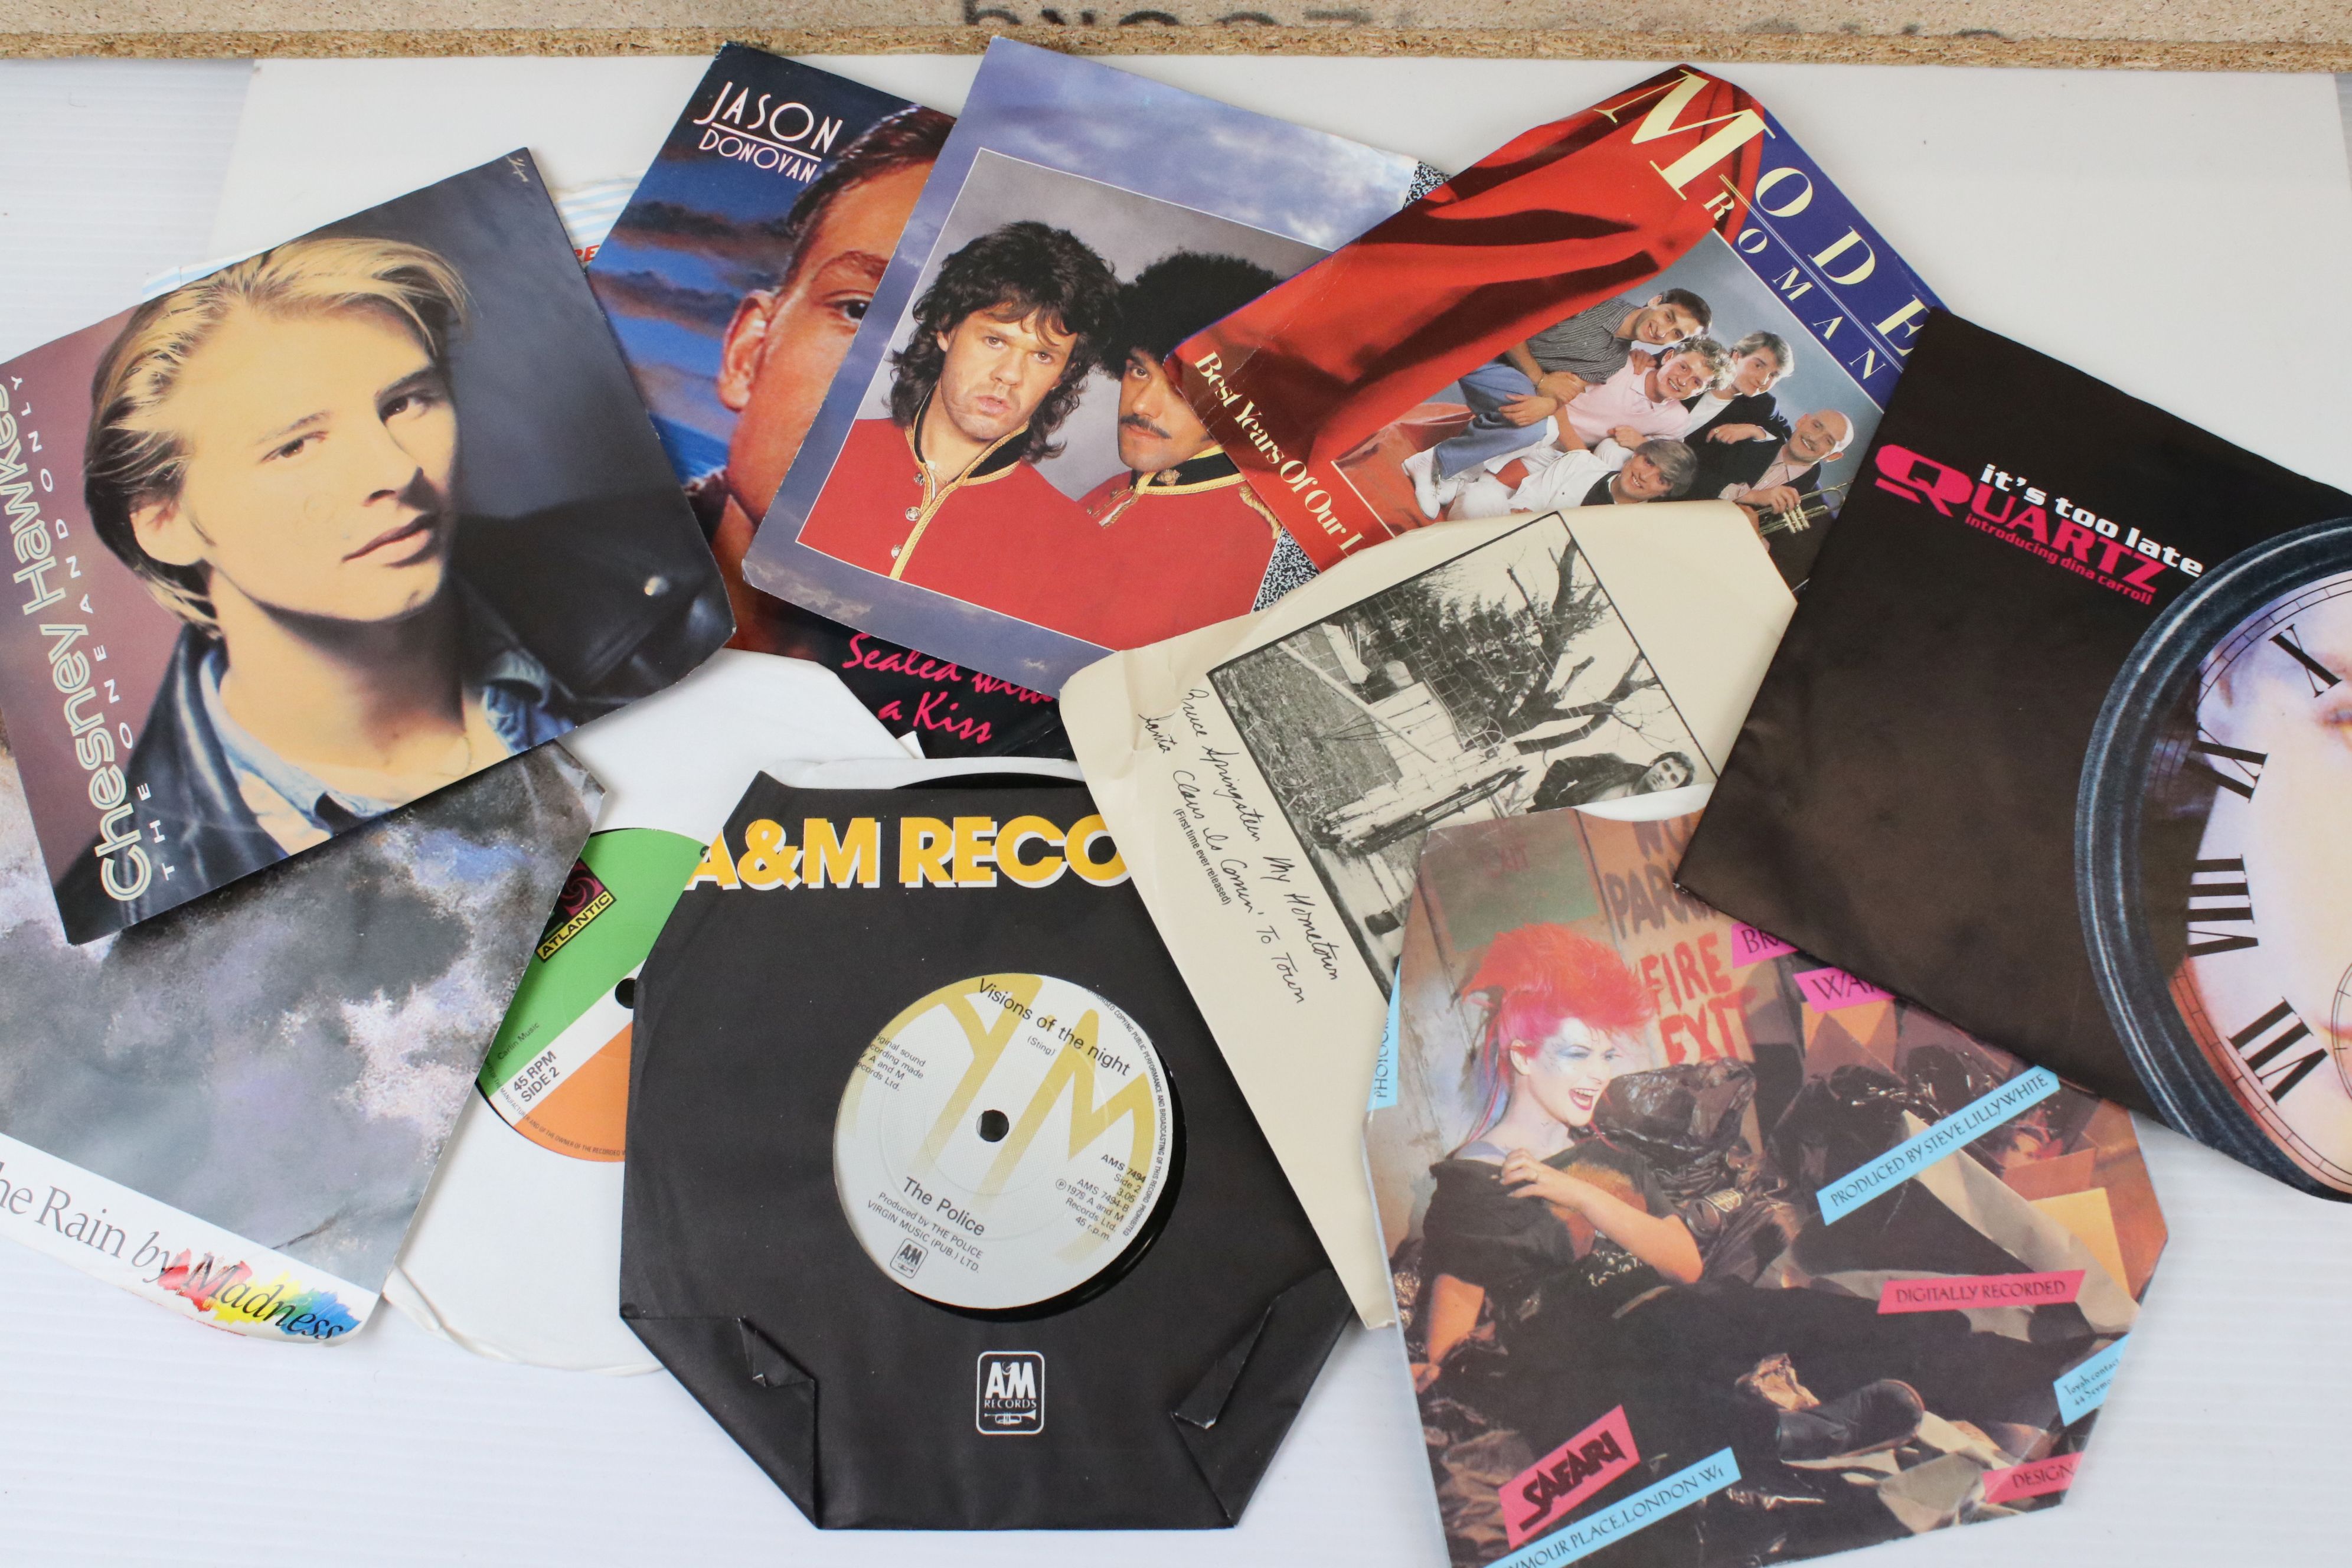 Vinyl - Towards 200 7" singles featuring mainly Pop circa 1980s, mostly with picture sleeves, vg+ - Image 3 of 5